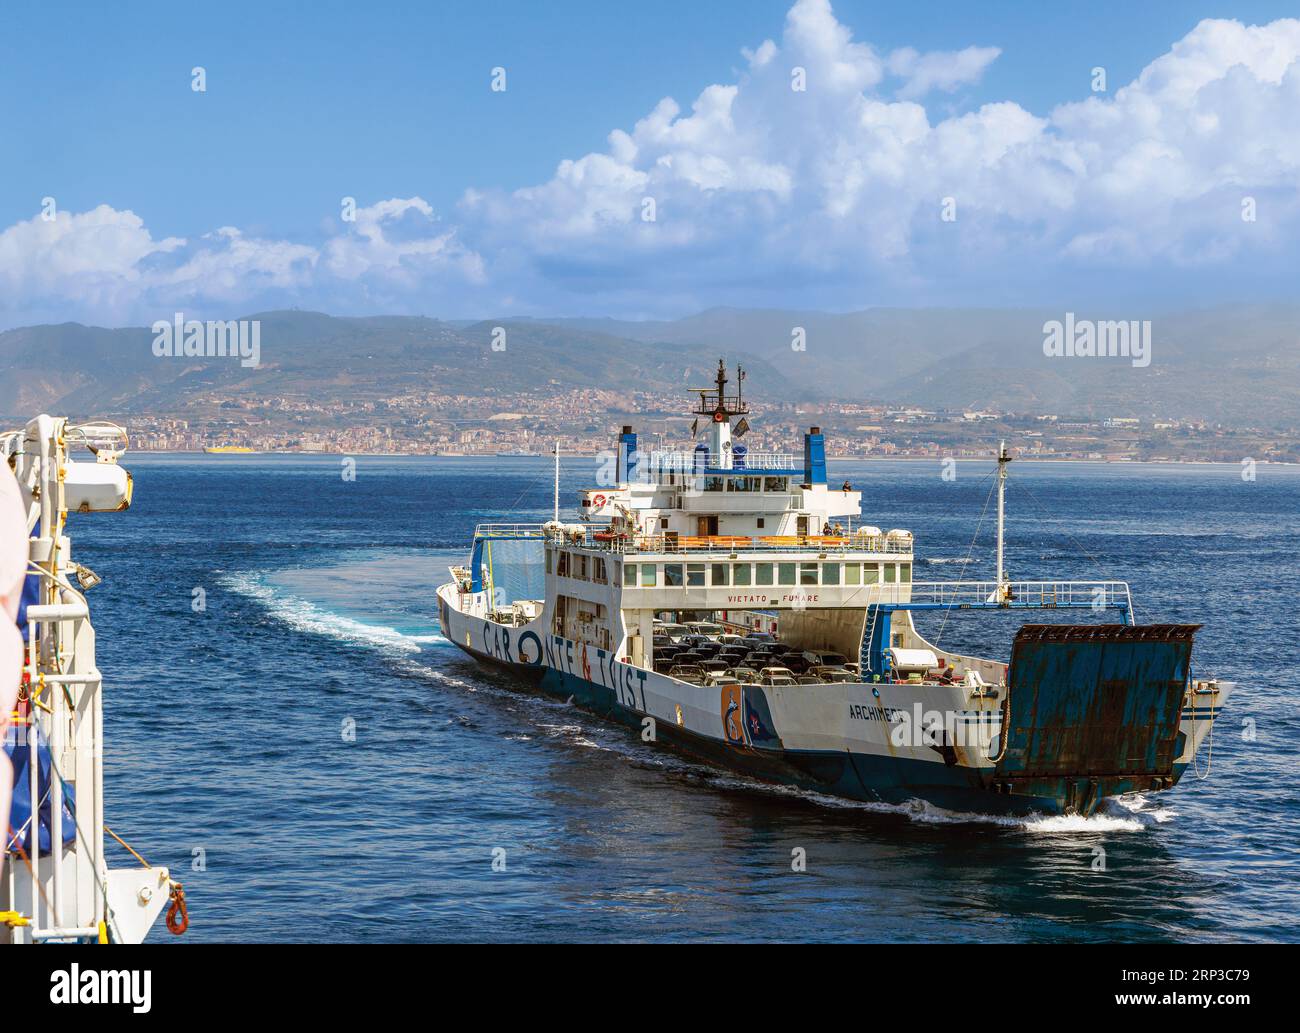 Car ferry in the Strait of Messina approaching Villa San Giovanni, Calabria, Italy from Messina, Sicily, seen in background. Stock Photo